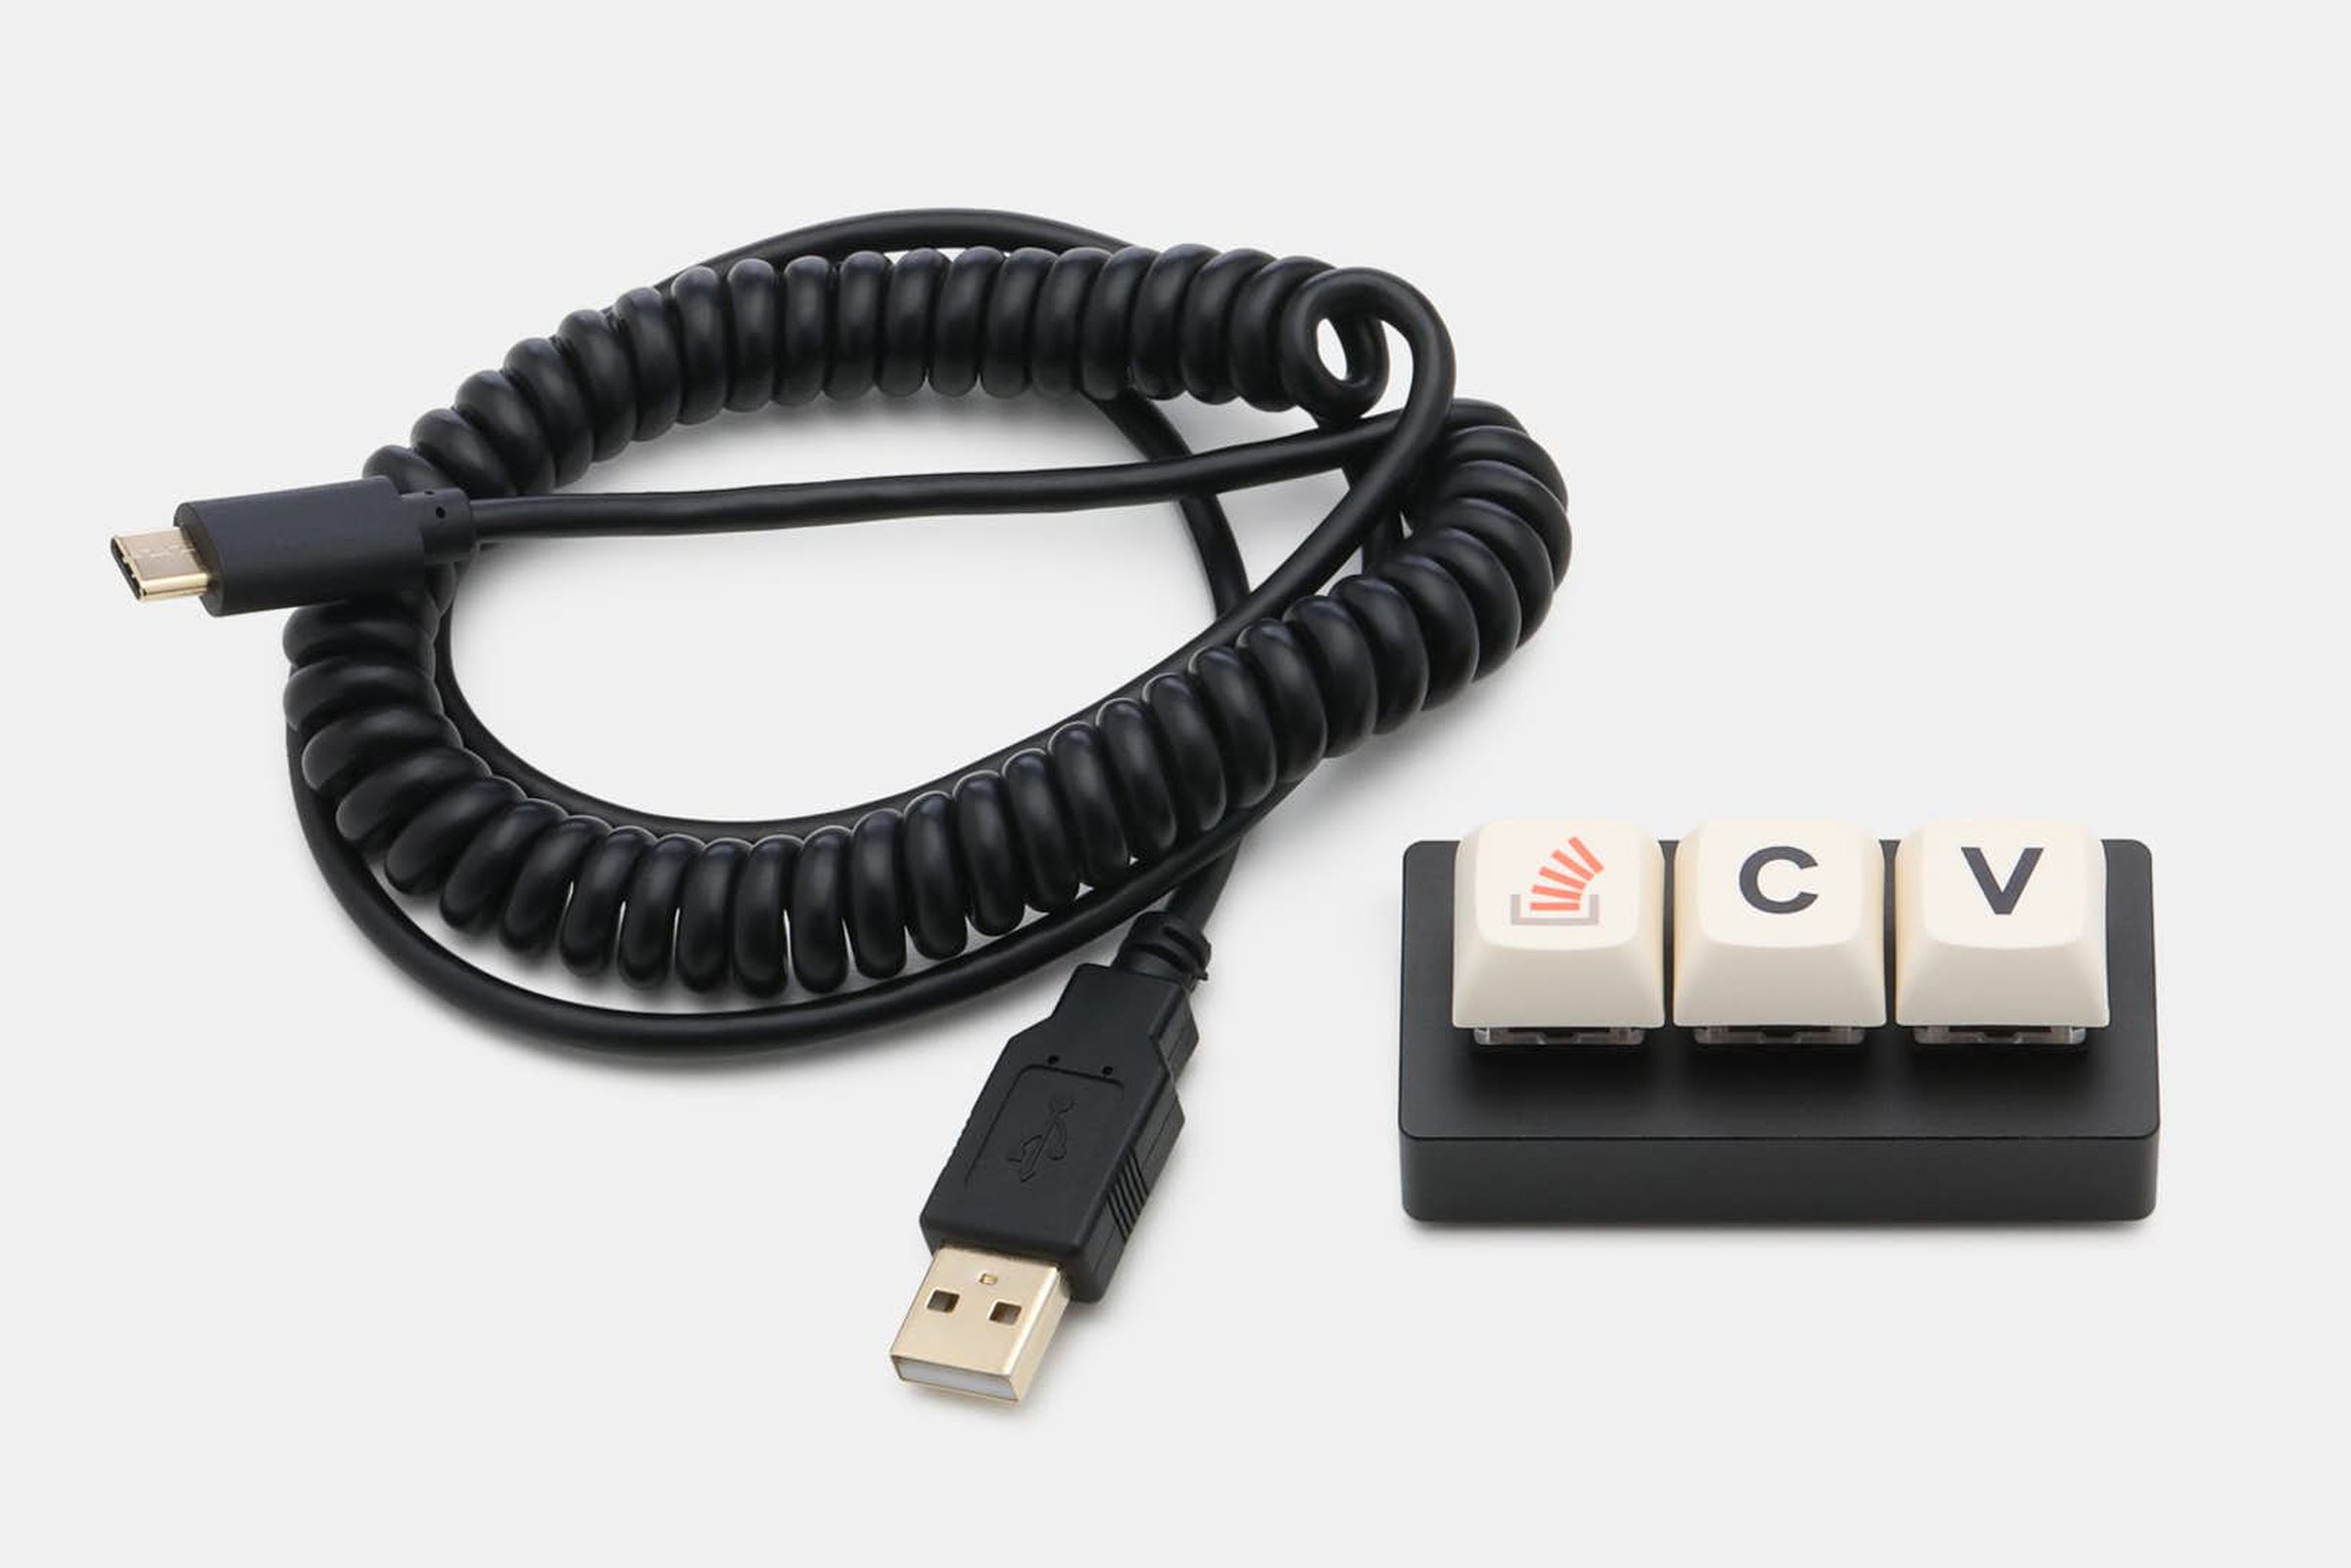 The Key laid horizontally on a white surface next to a black cord.